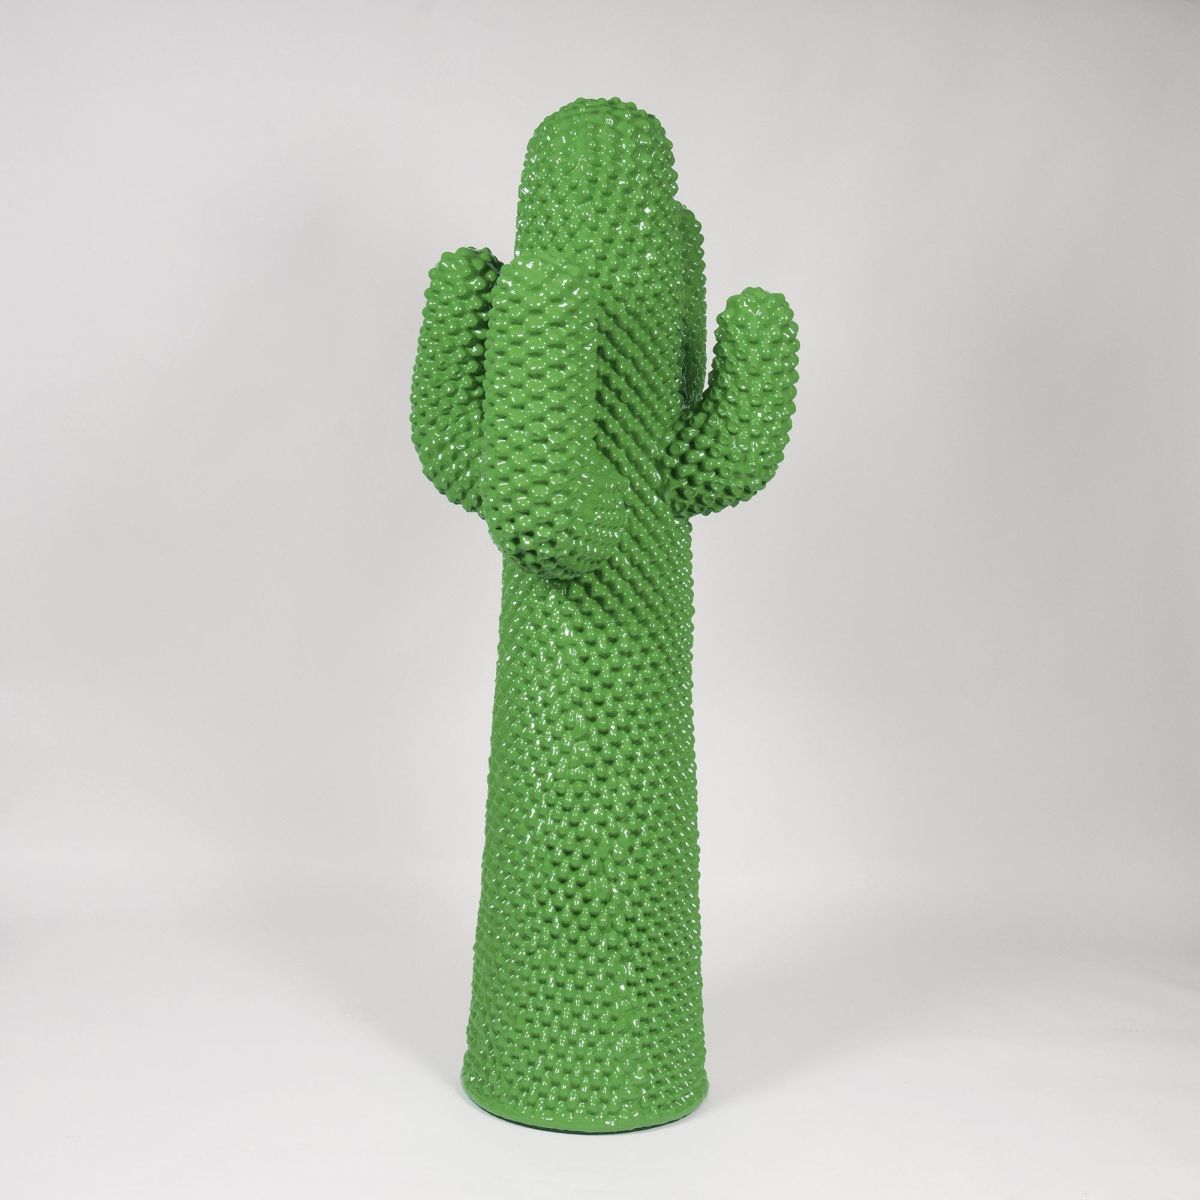 An Iconic Coat Stand 'Cactus'